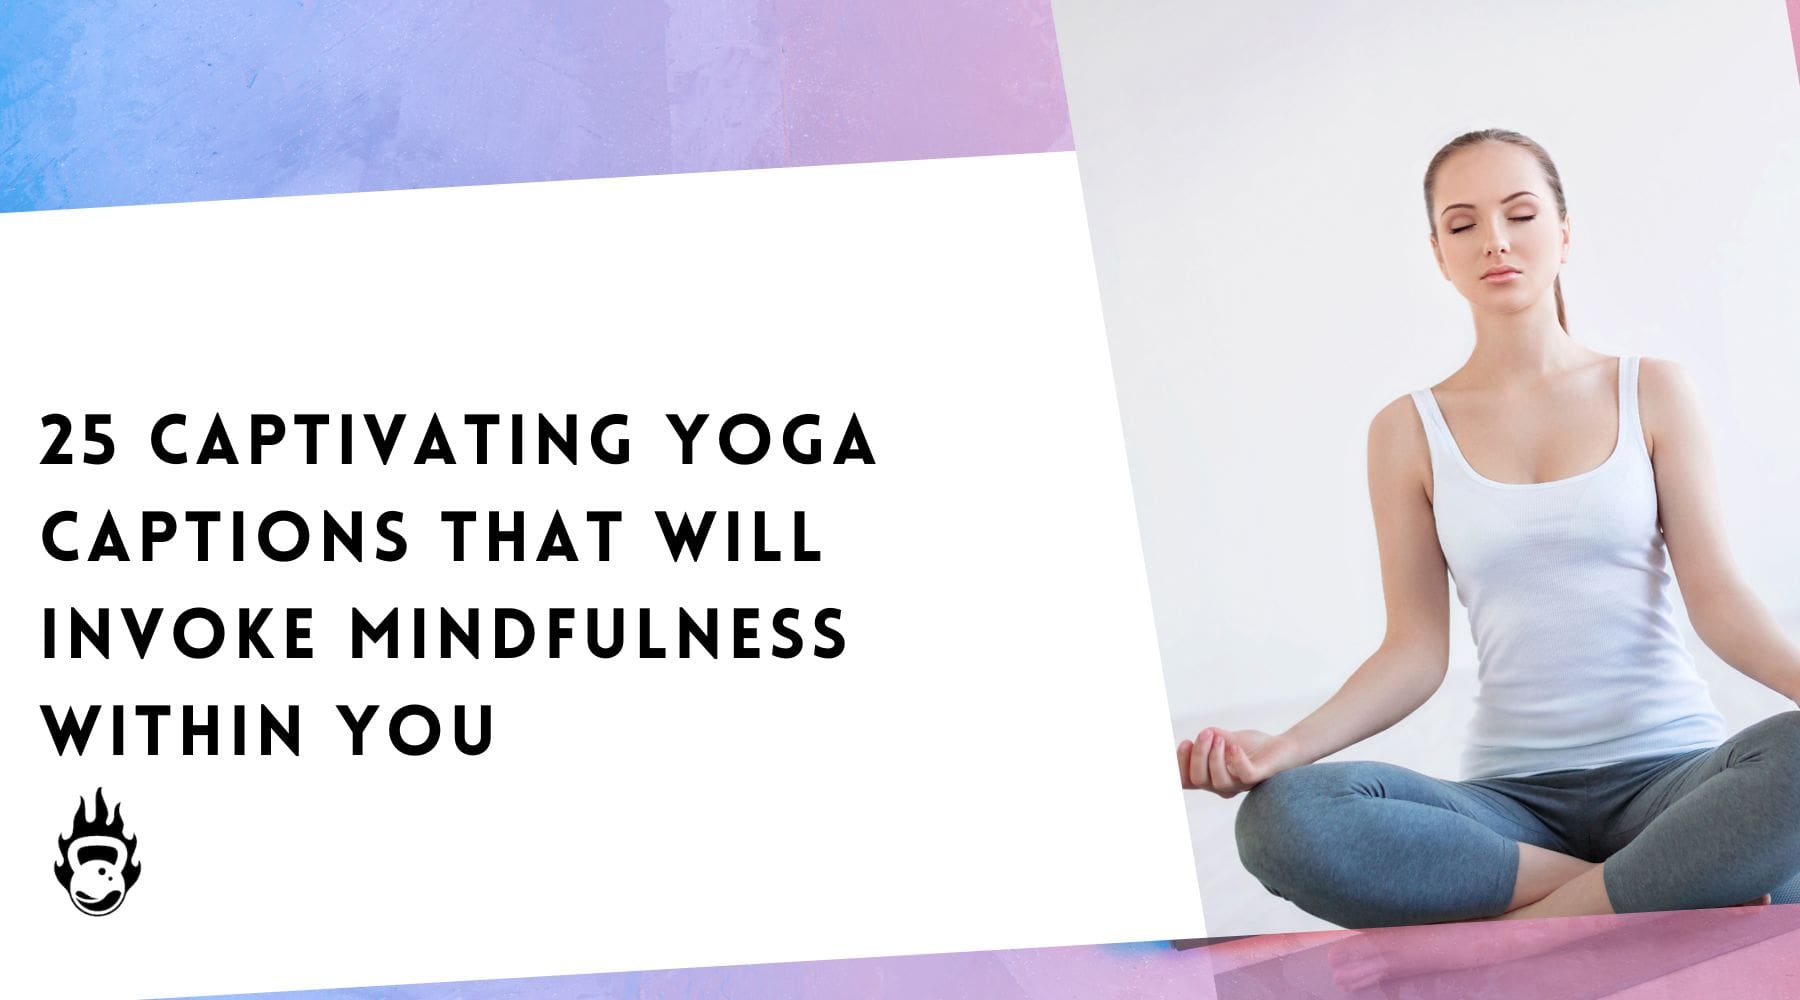 12 Yoga Quotes To Keep You Inspired On and Off The Mat